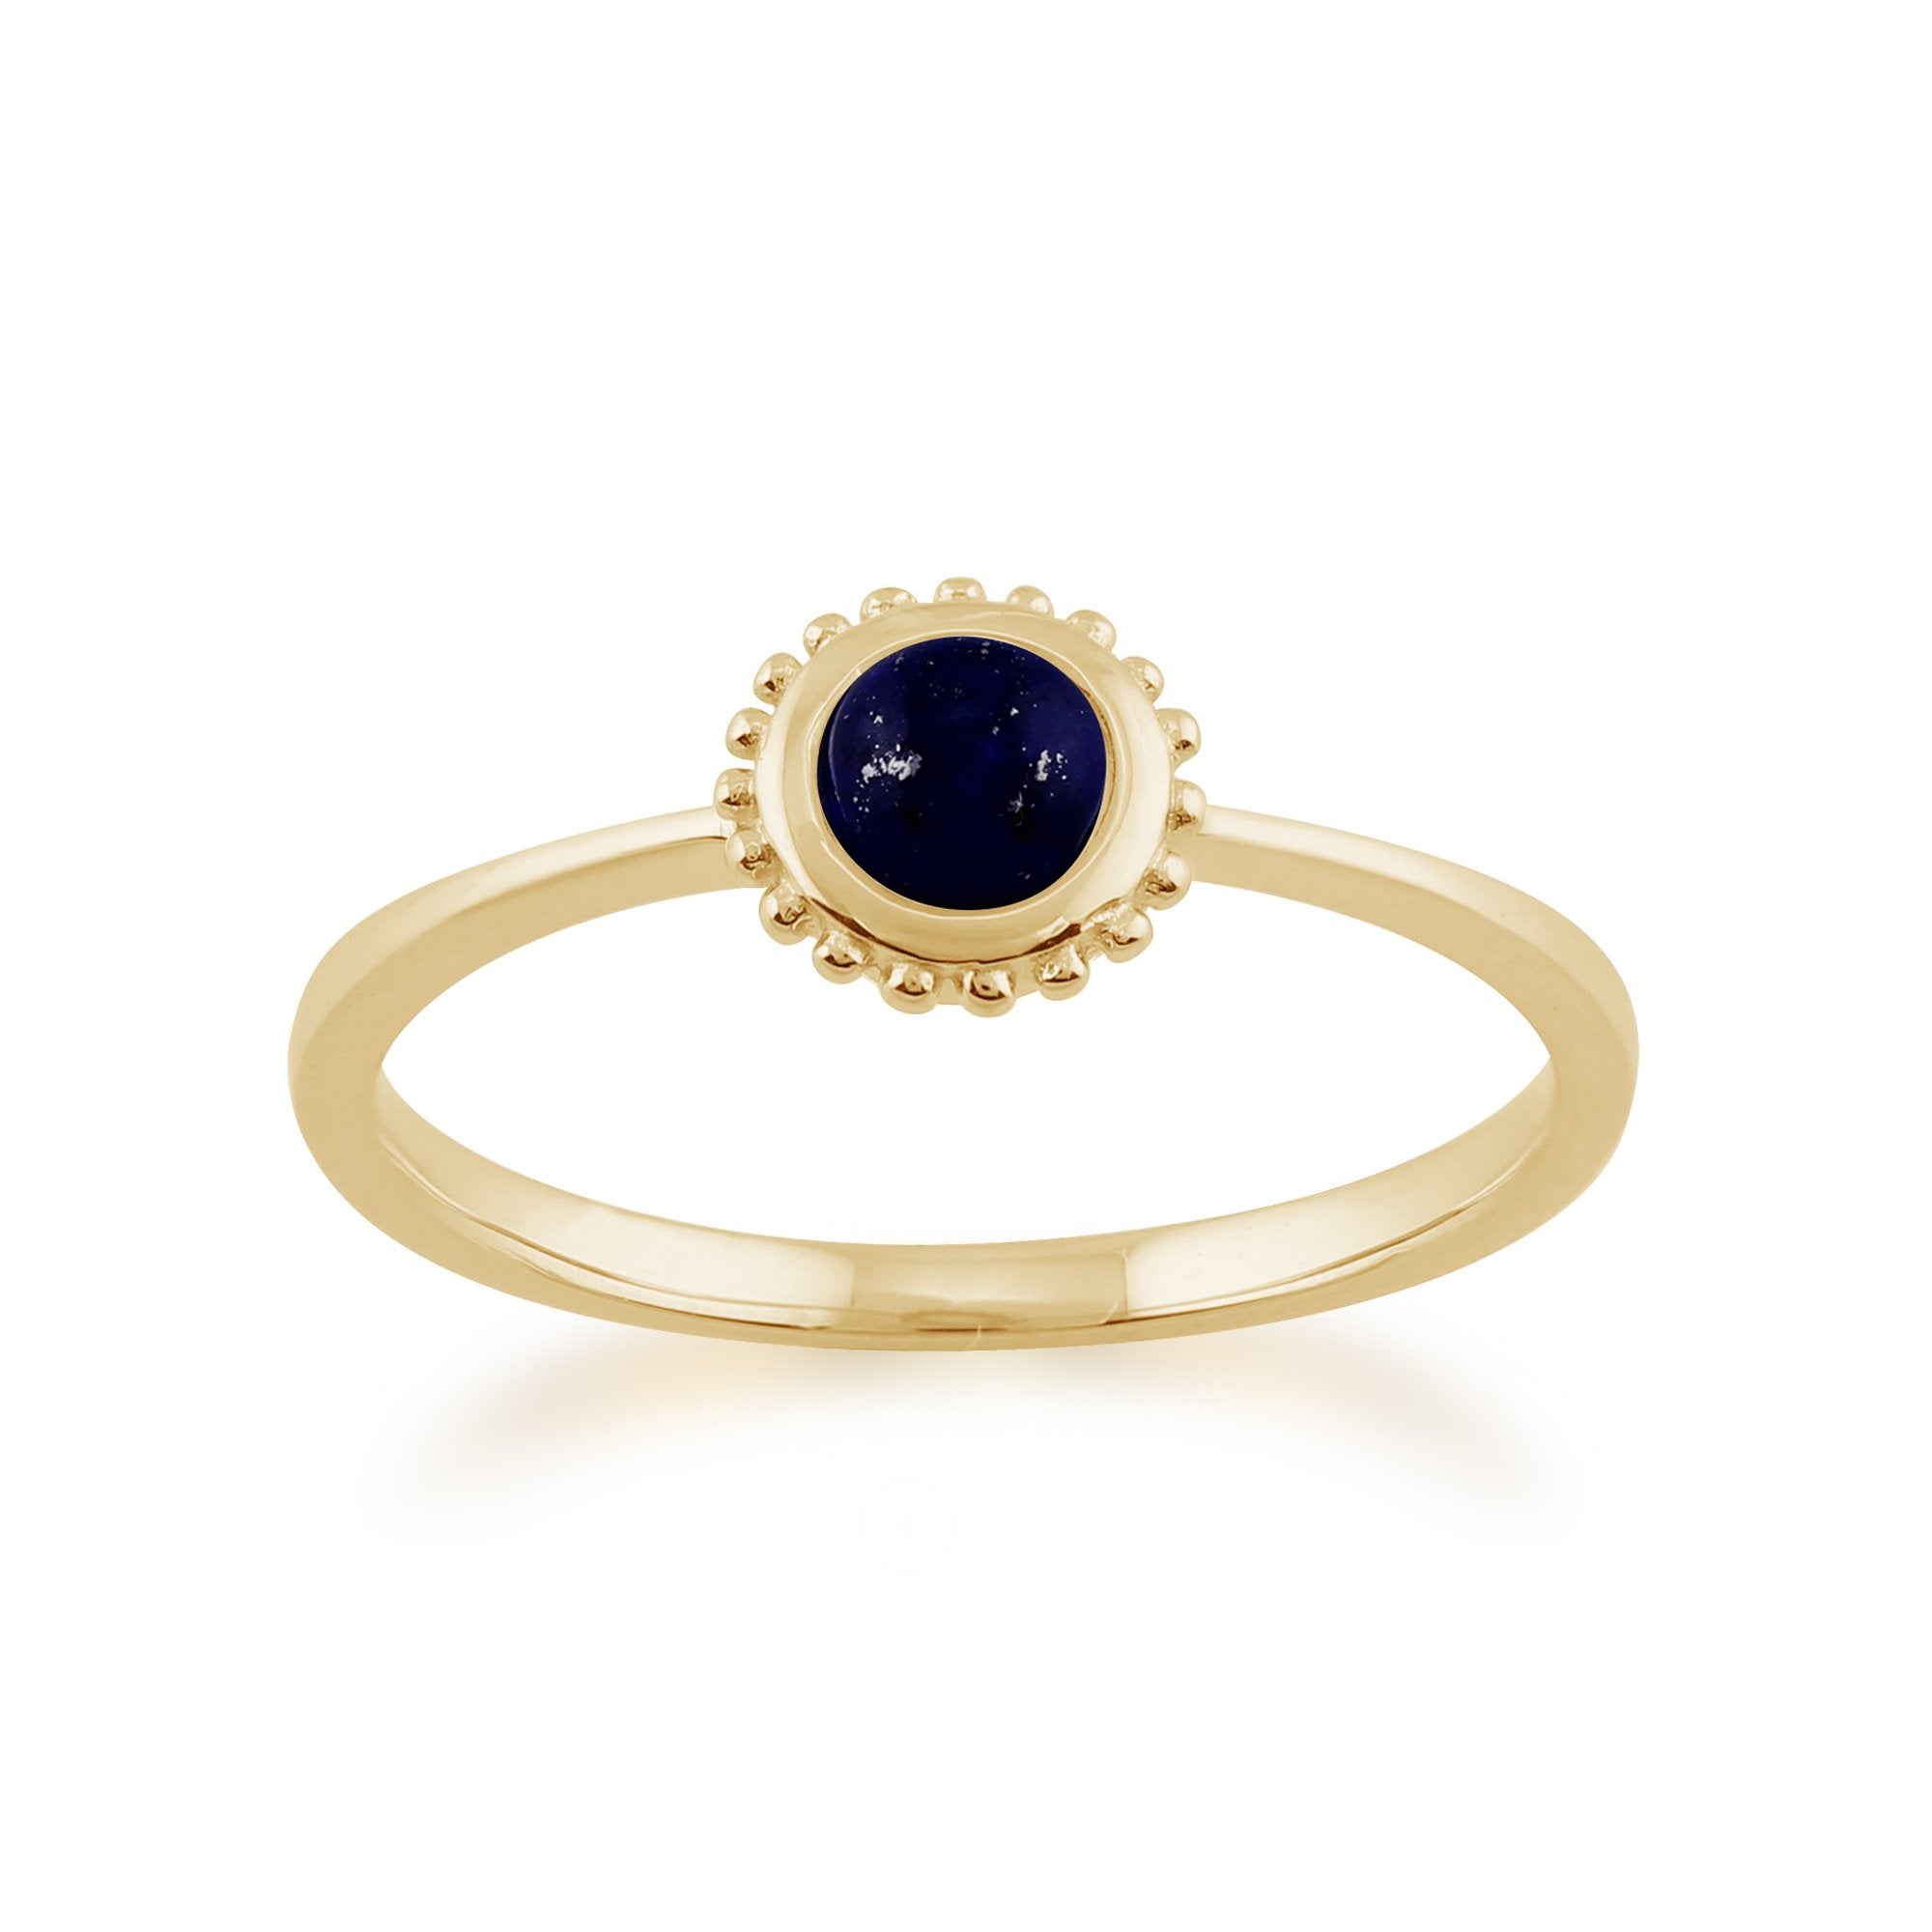 Classic Round Lapis Lazuli Single Stone Pendant & Solitaire Ring Set in 9ct Yellow Gold